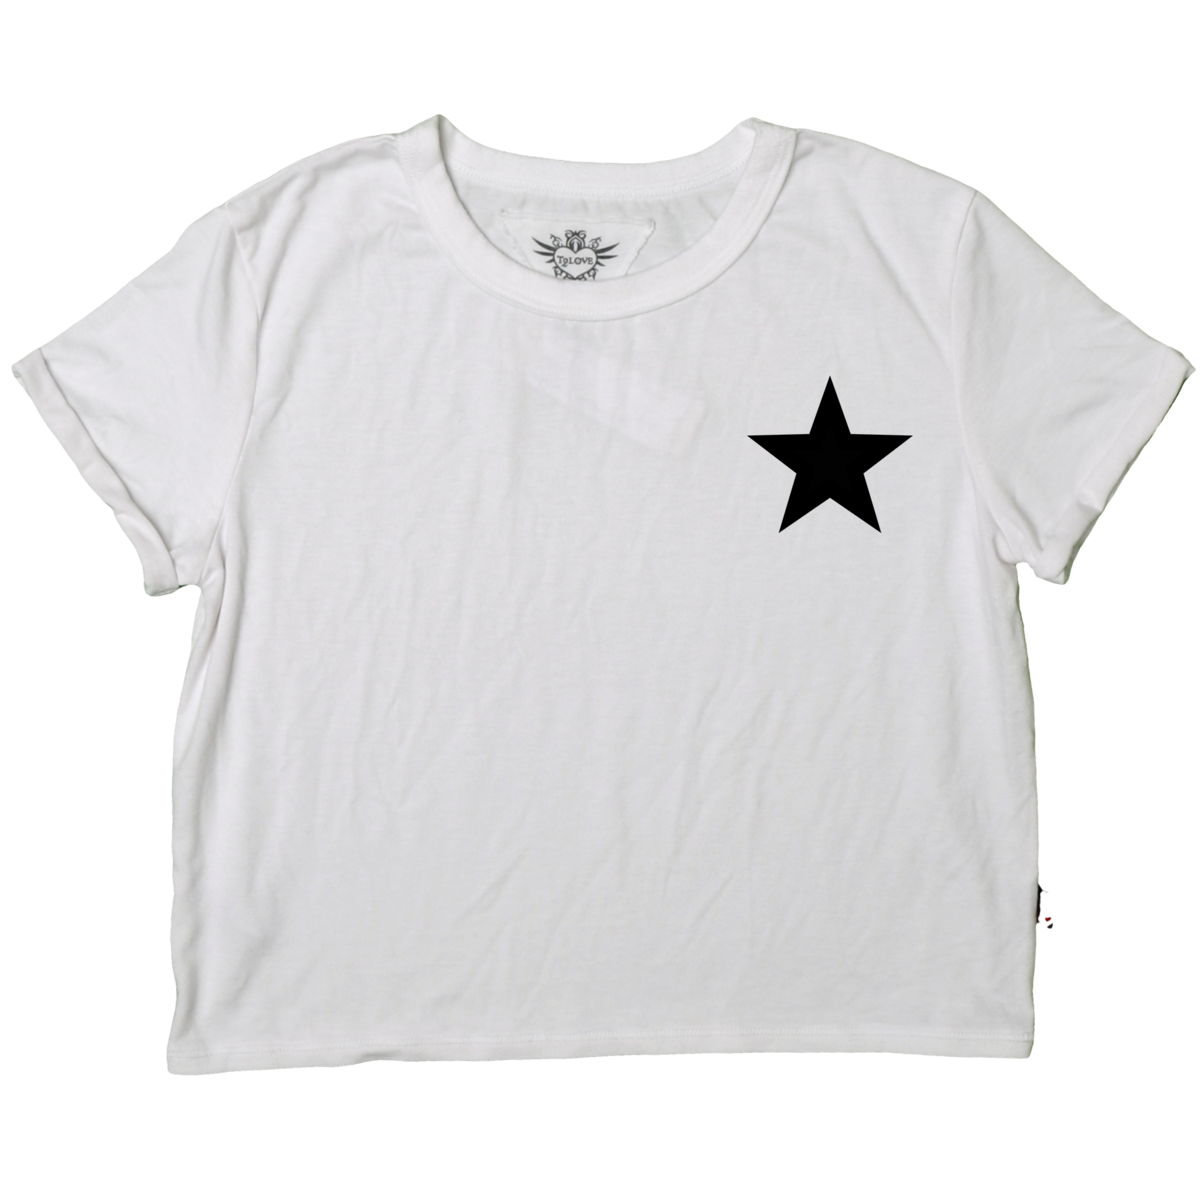 T2Love - White Boxy Tee with Black Star Print